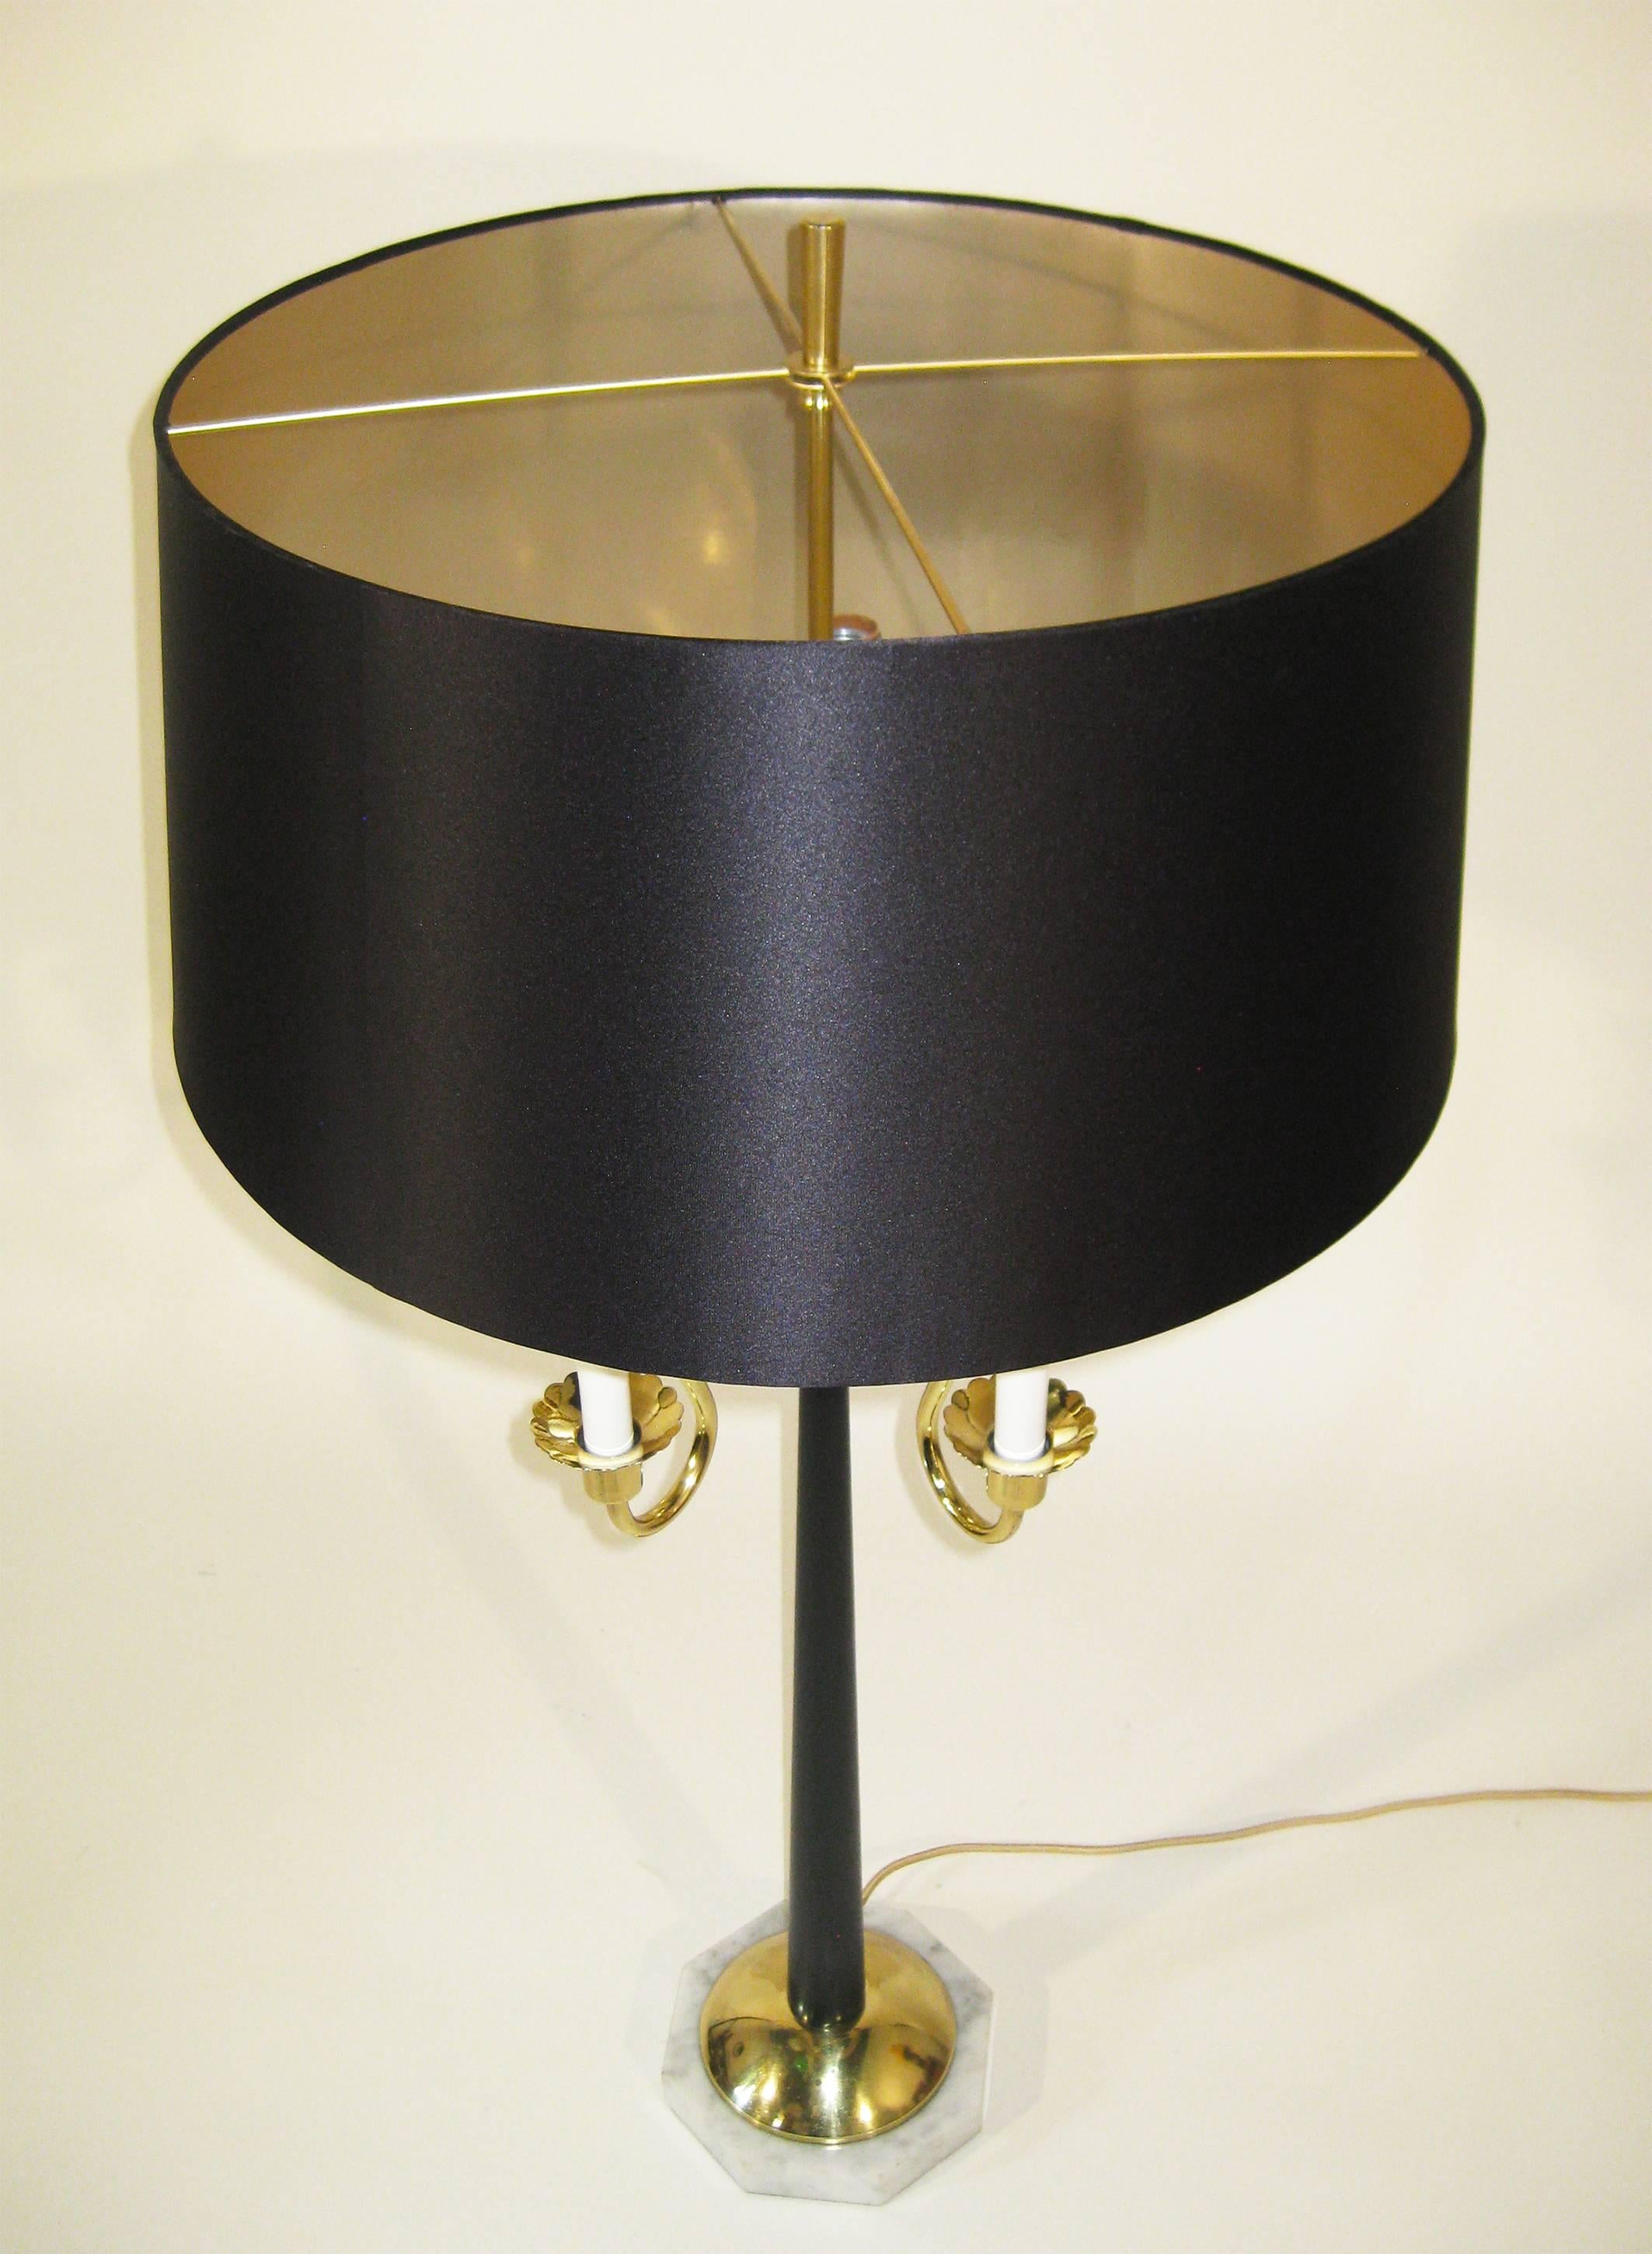 Brass Mid-Century Table Lamp by Tommi Parzinger, circa 1950